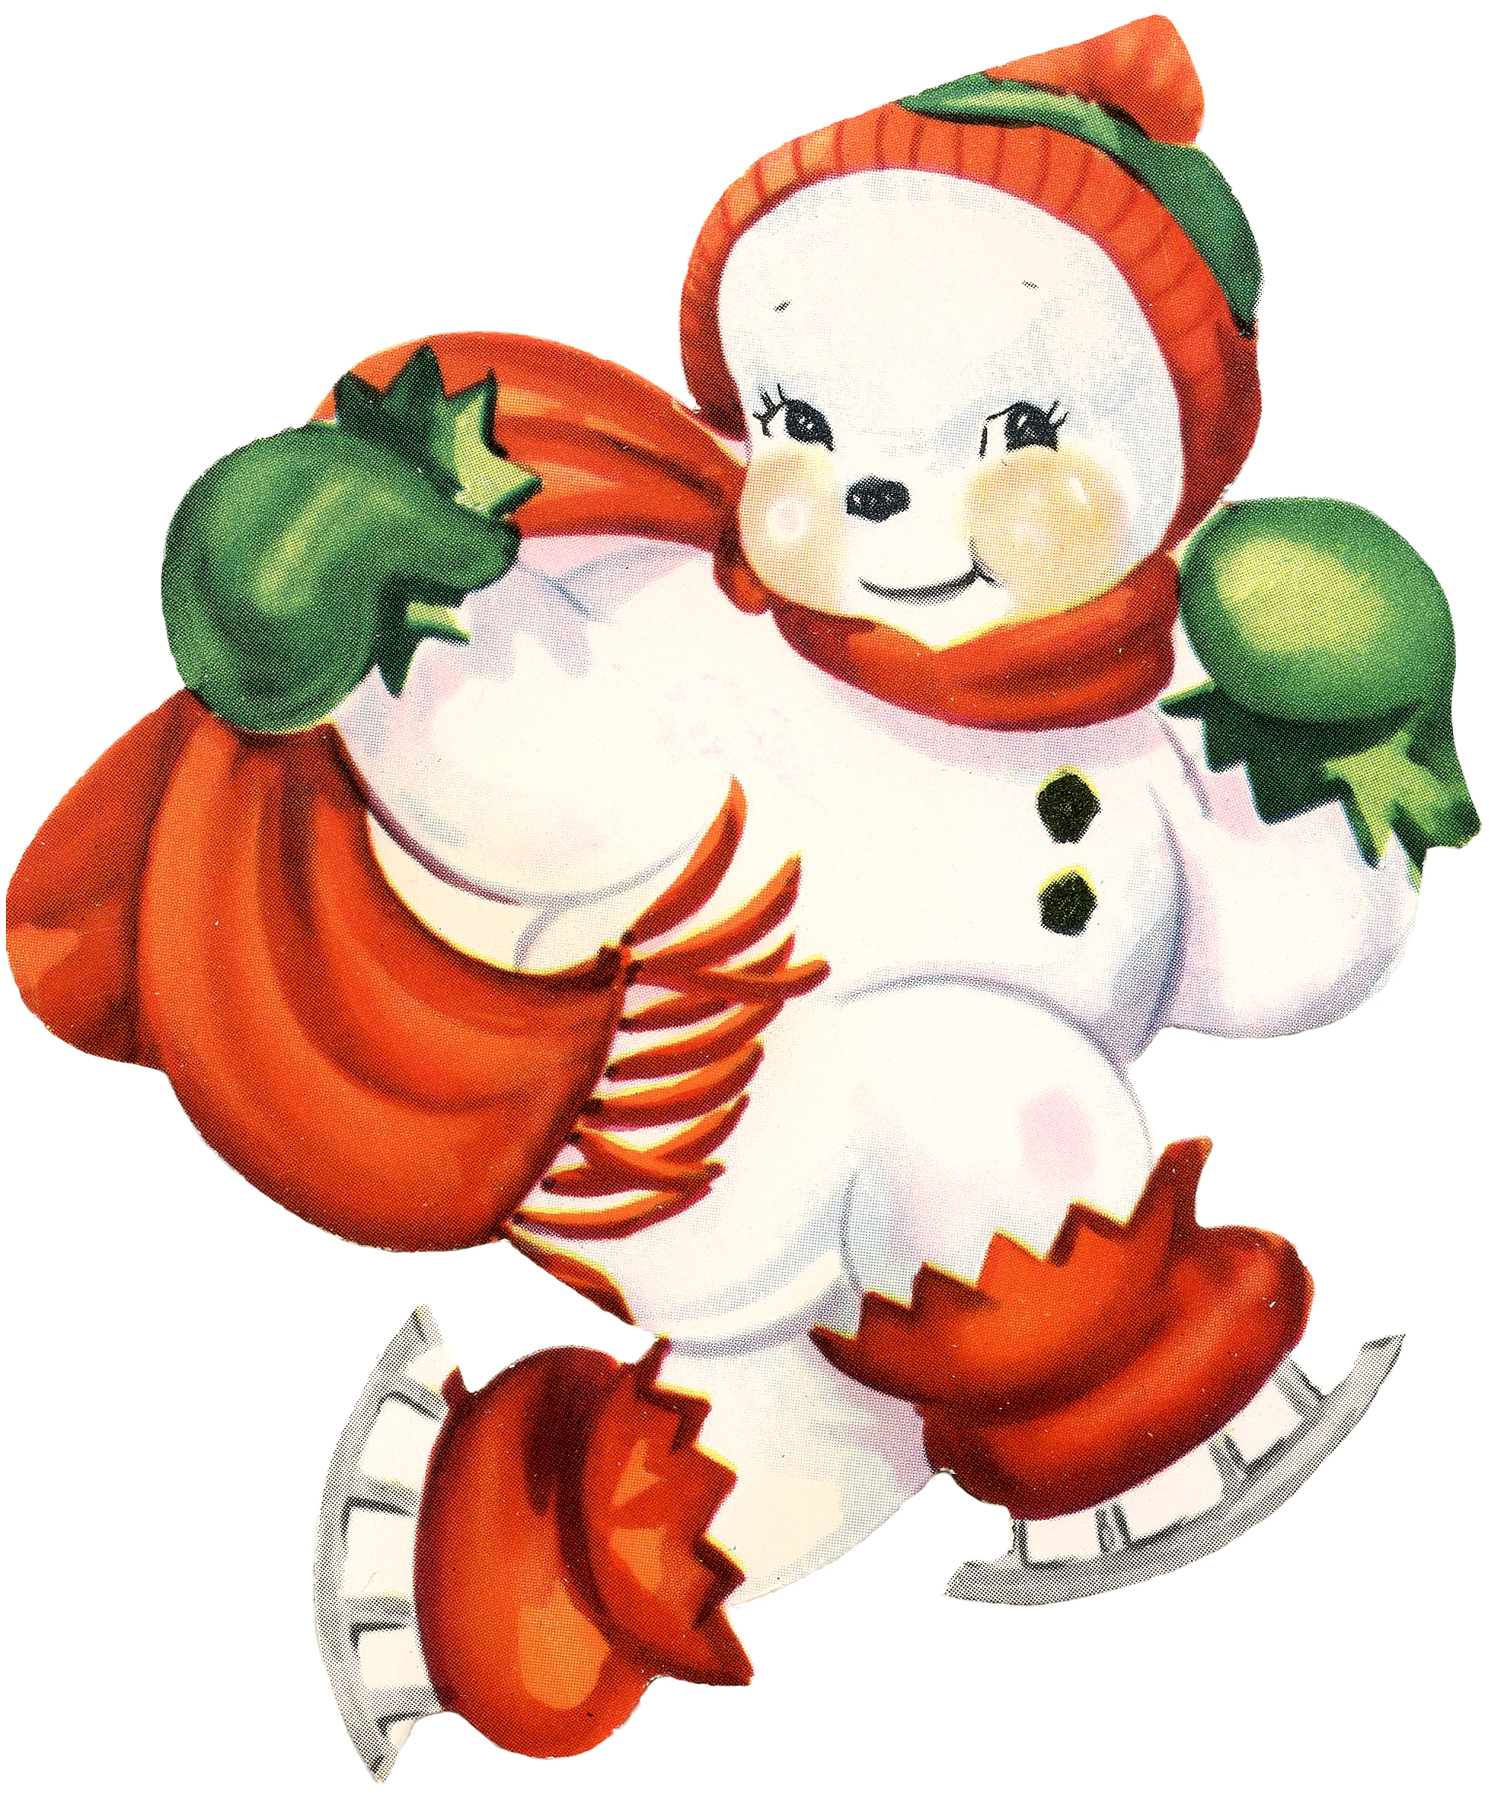 This Is A Super Cute Snowman Image This Adorable Retro Snowman Was